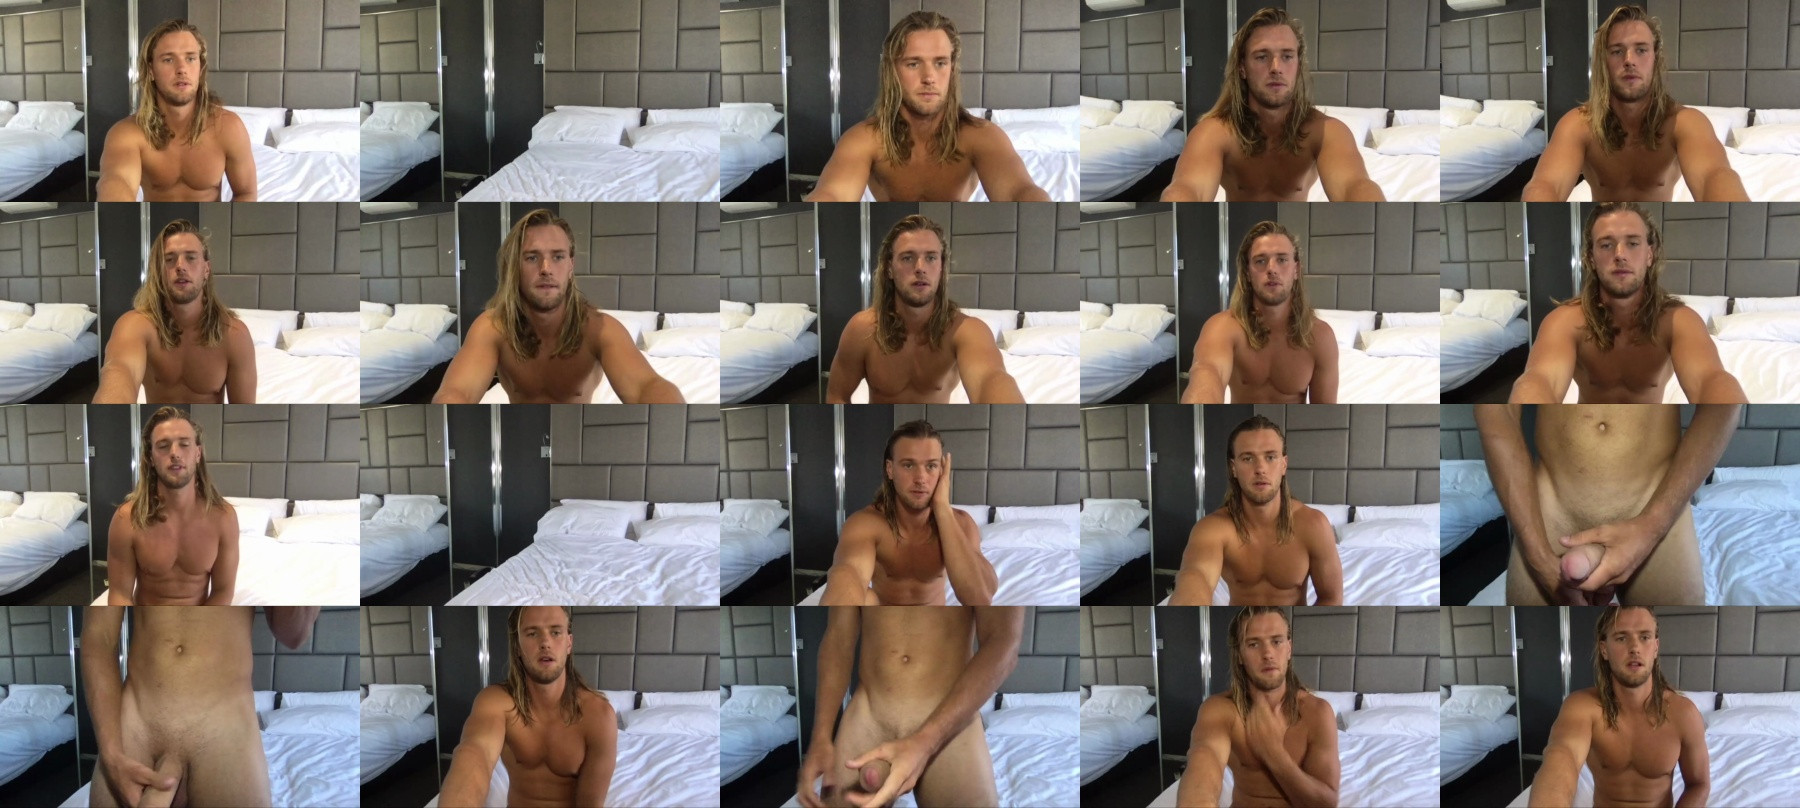 Courtney981  05-03-2021 Male Topless